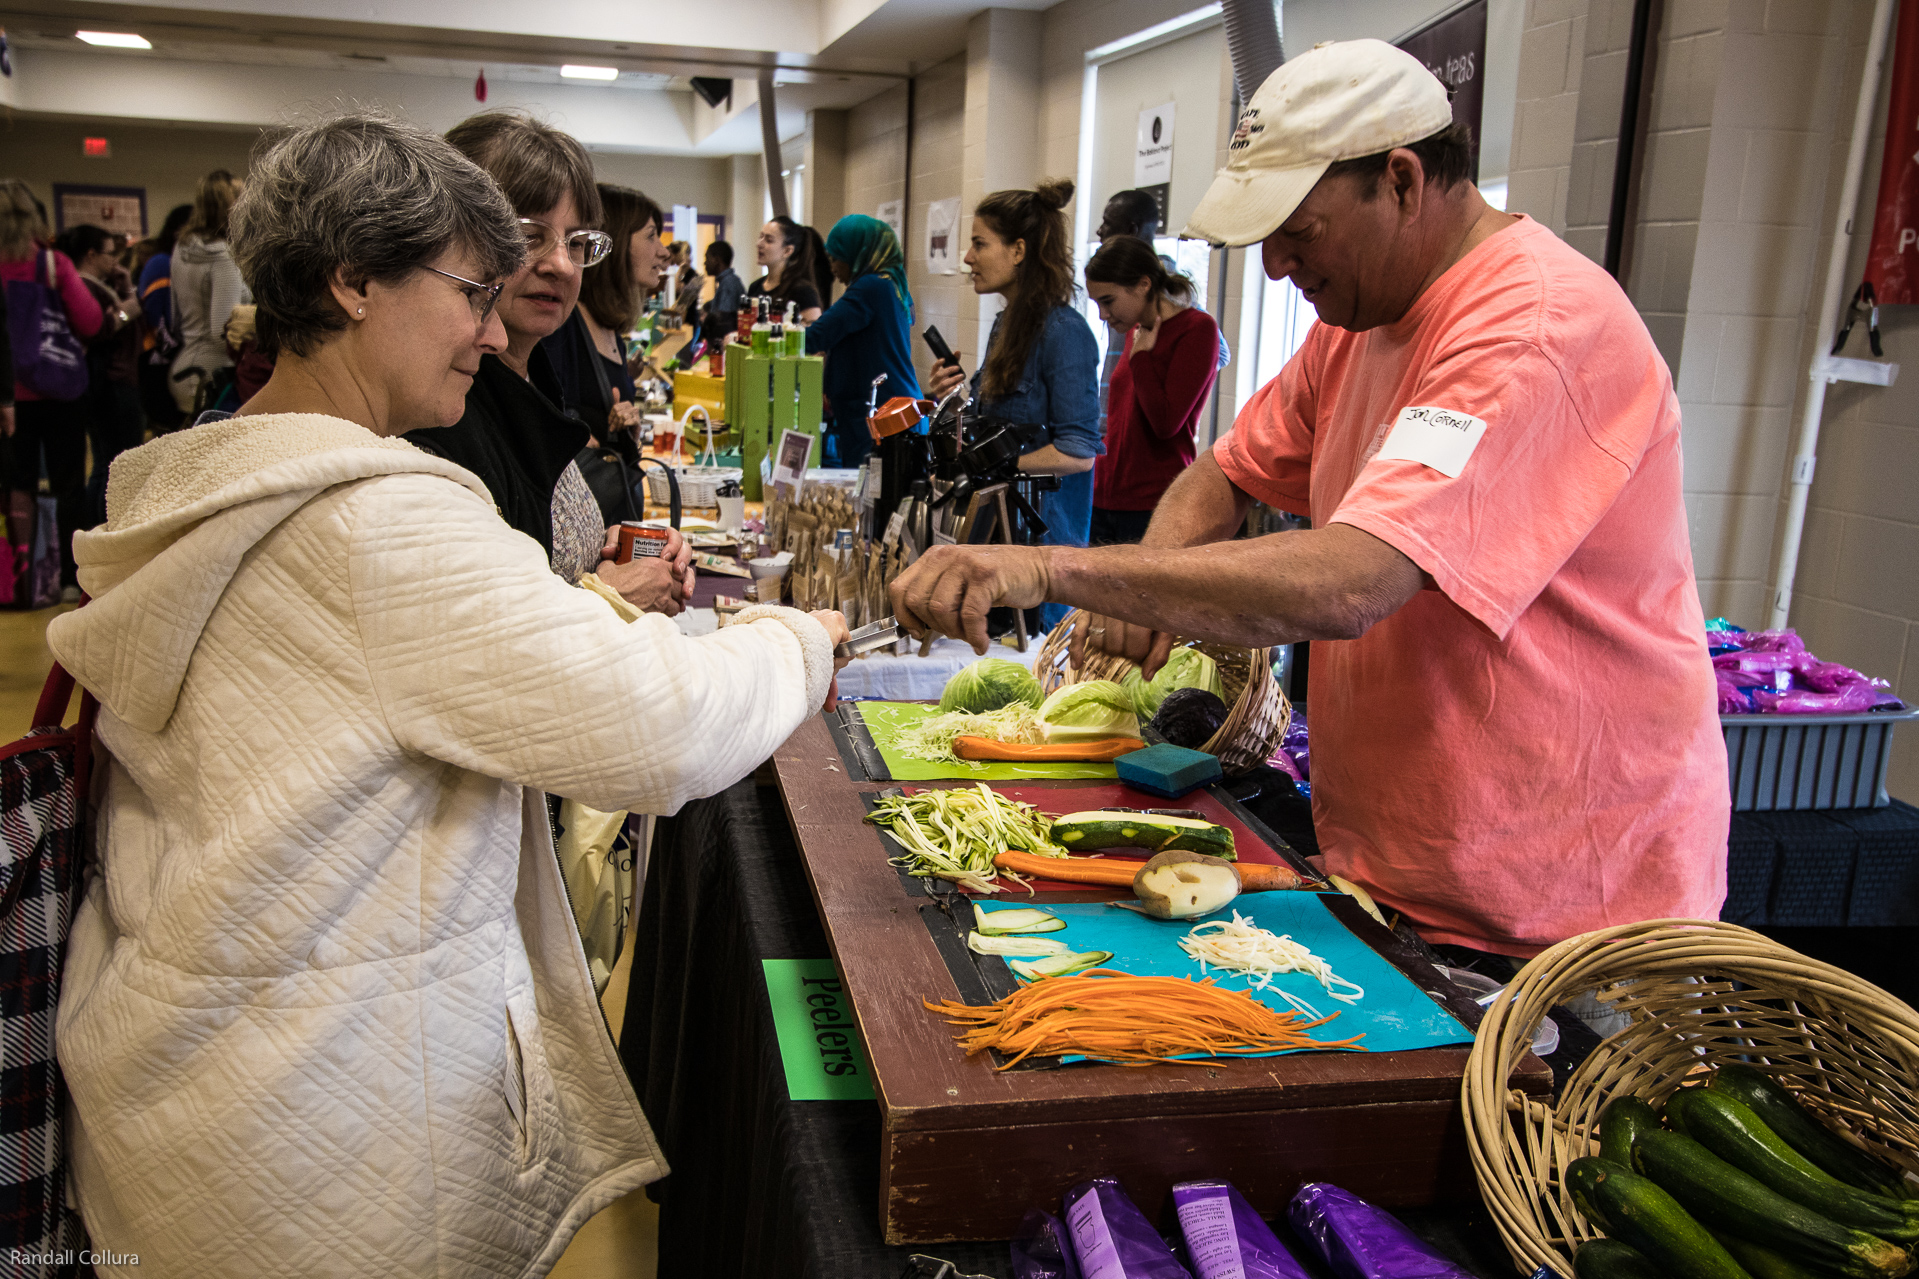 An exhibitor hands sliced veggies to a woman